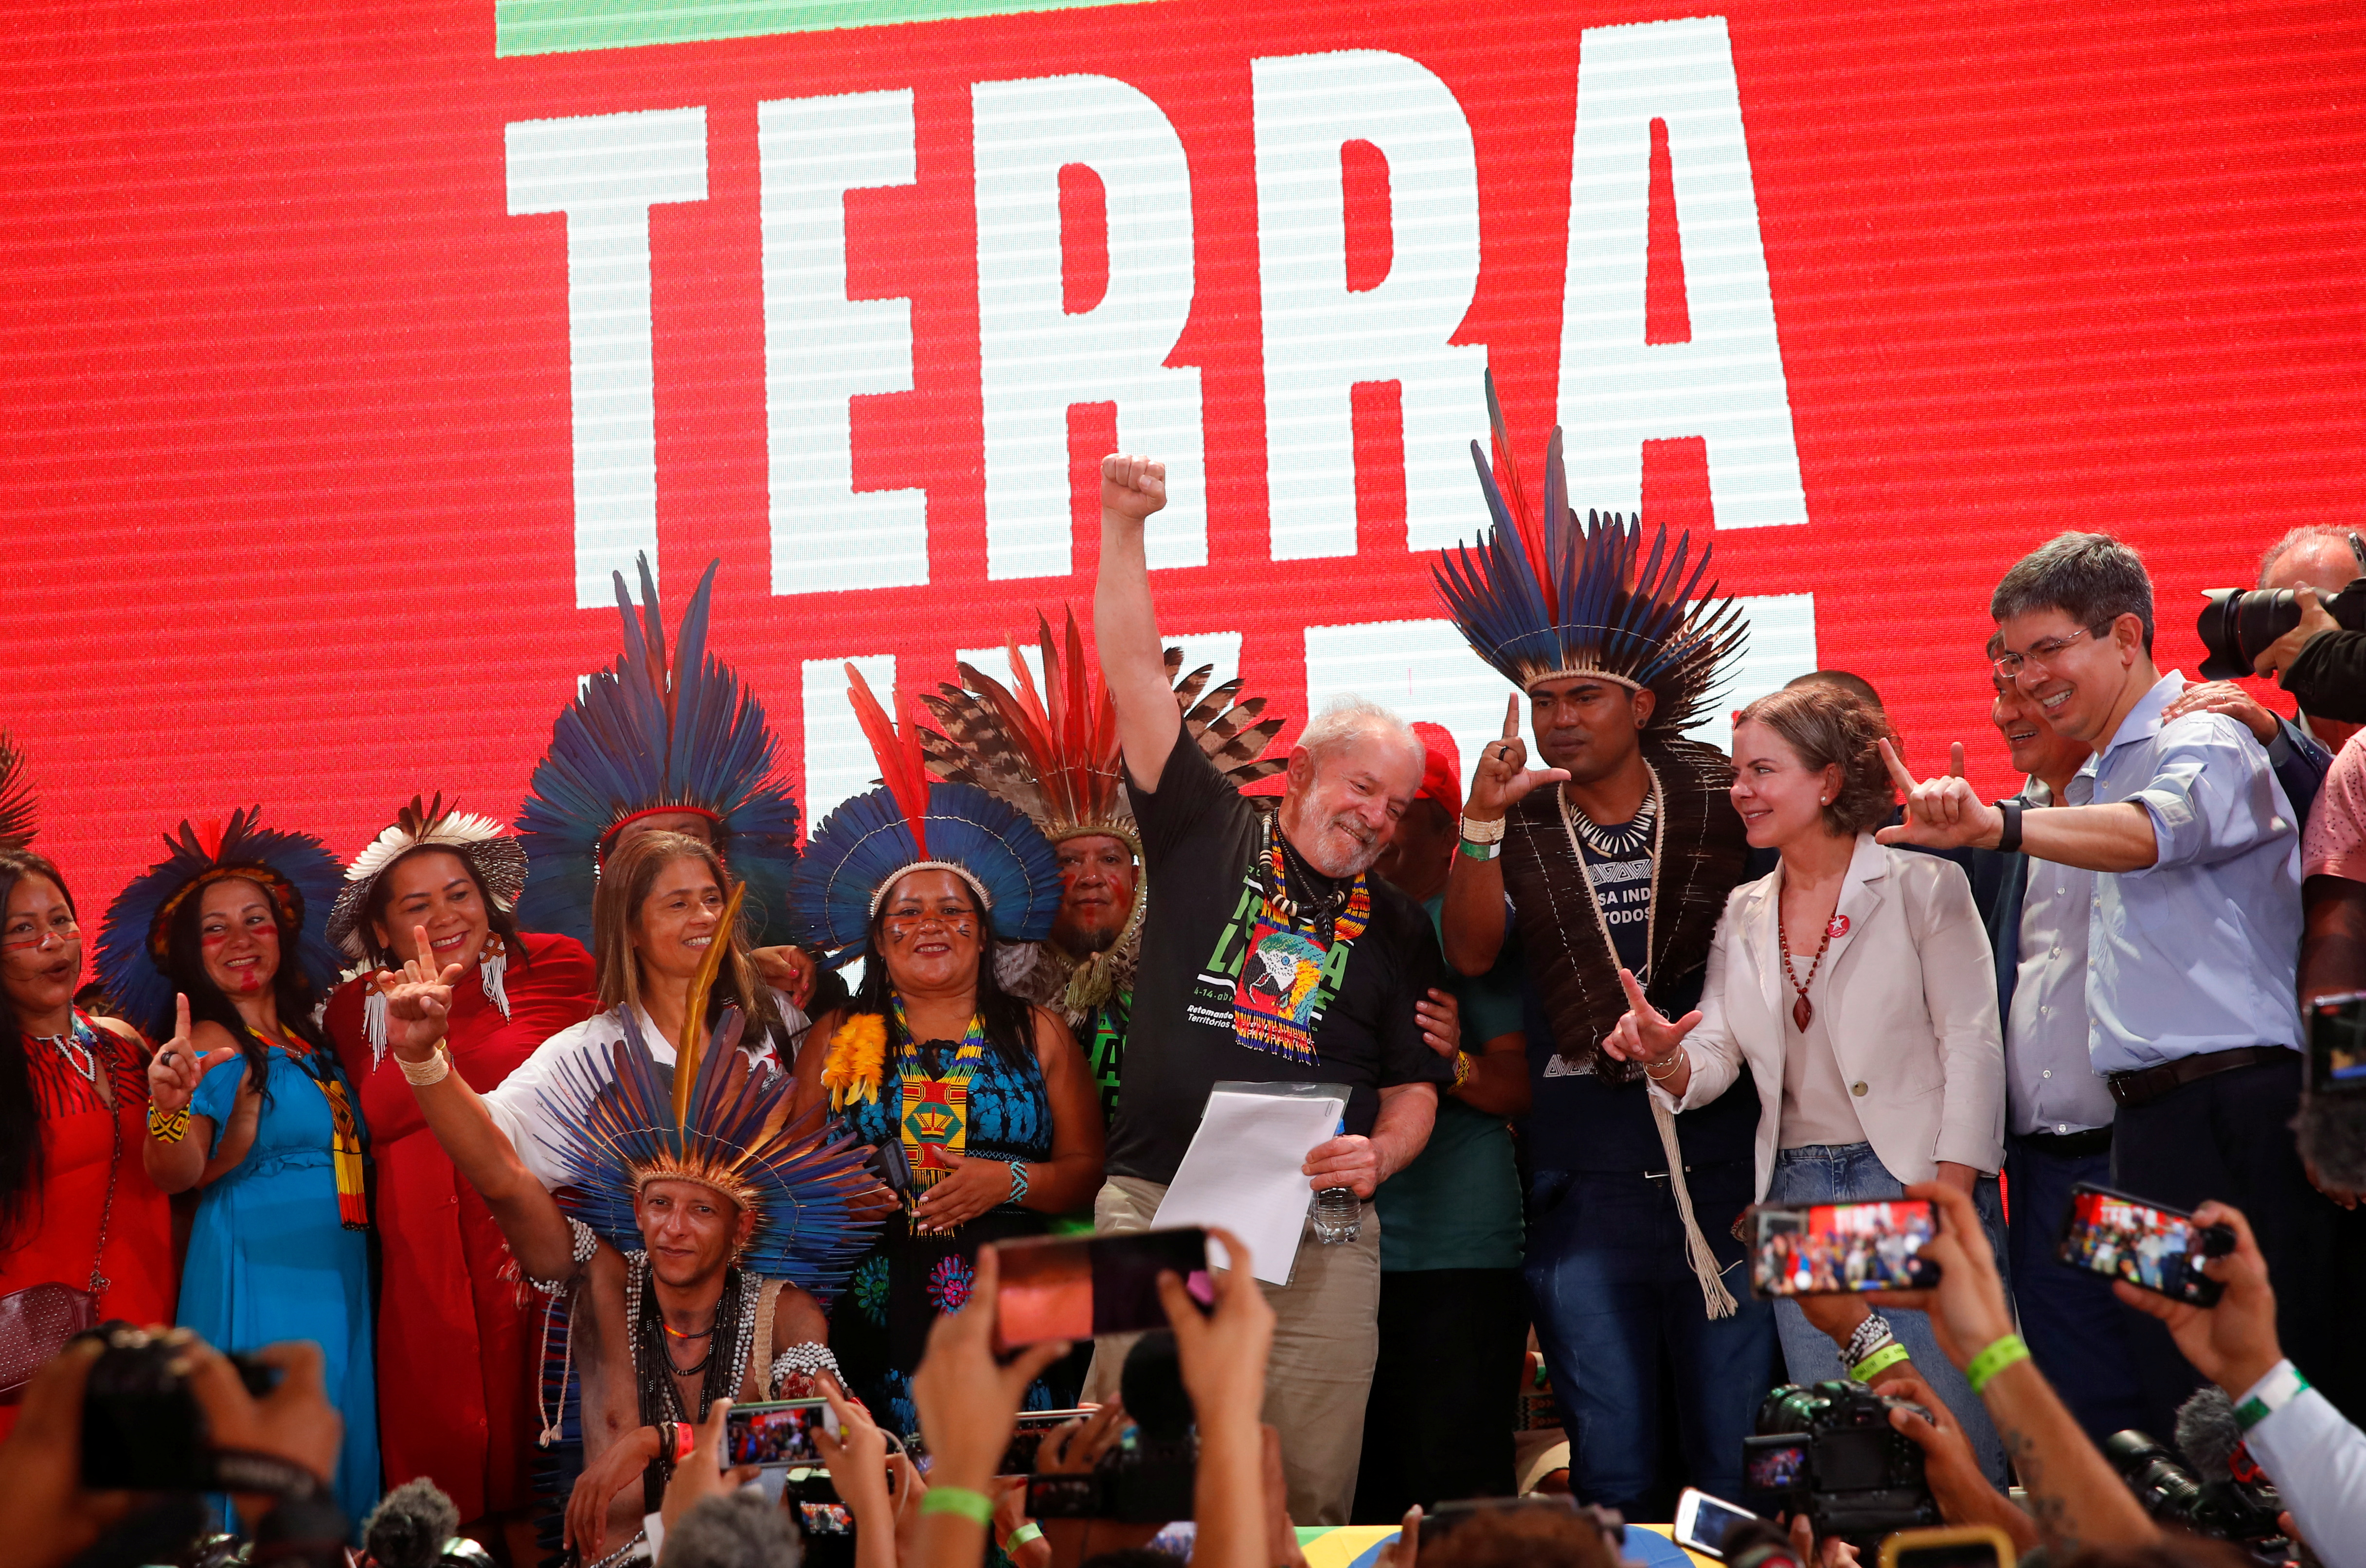 Brazil's former President Lula joins the indigenous people Free Land camp, in Brasilia